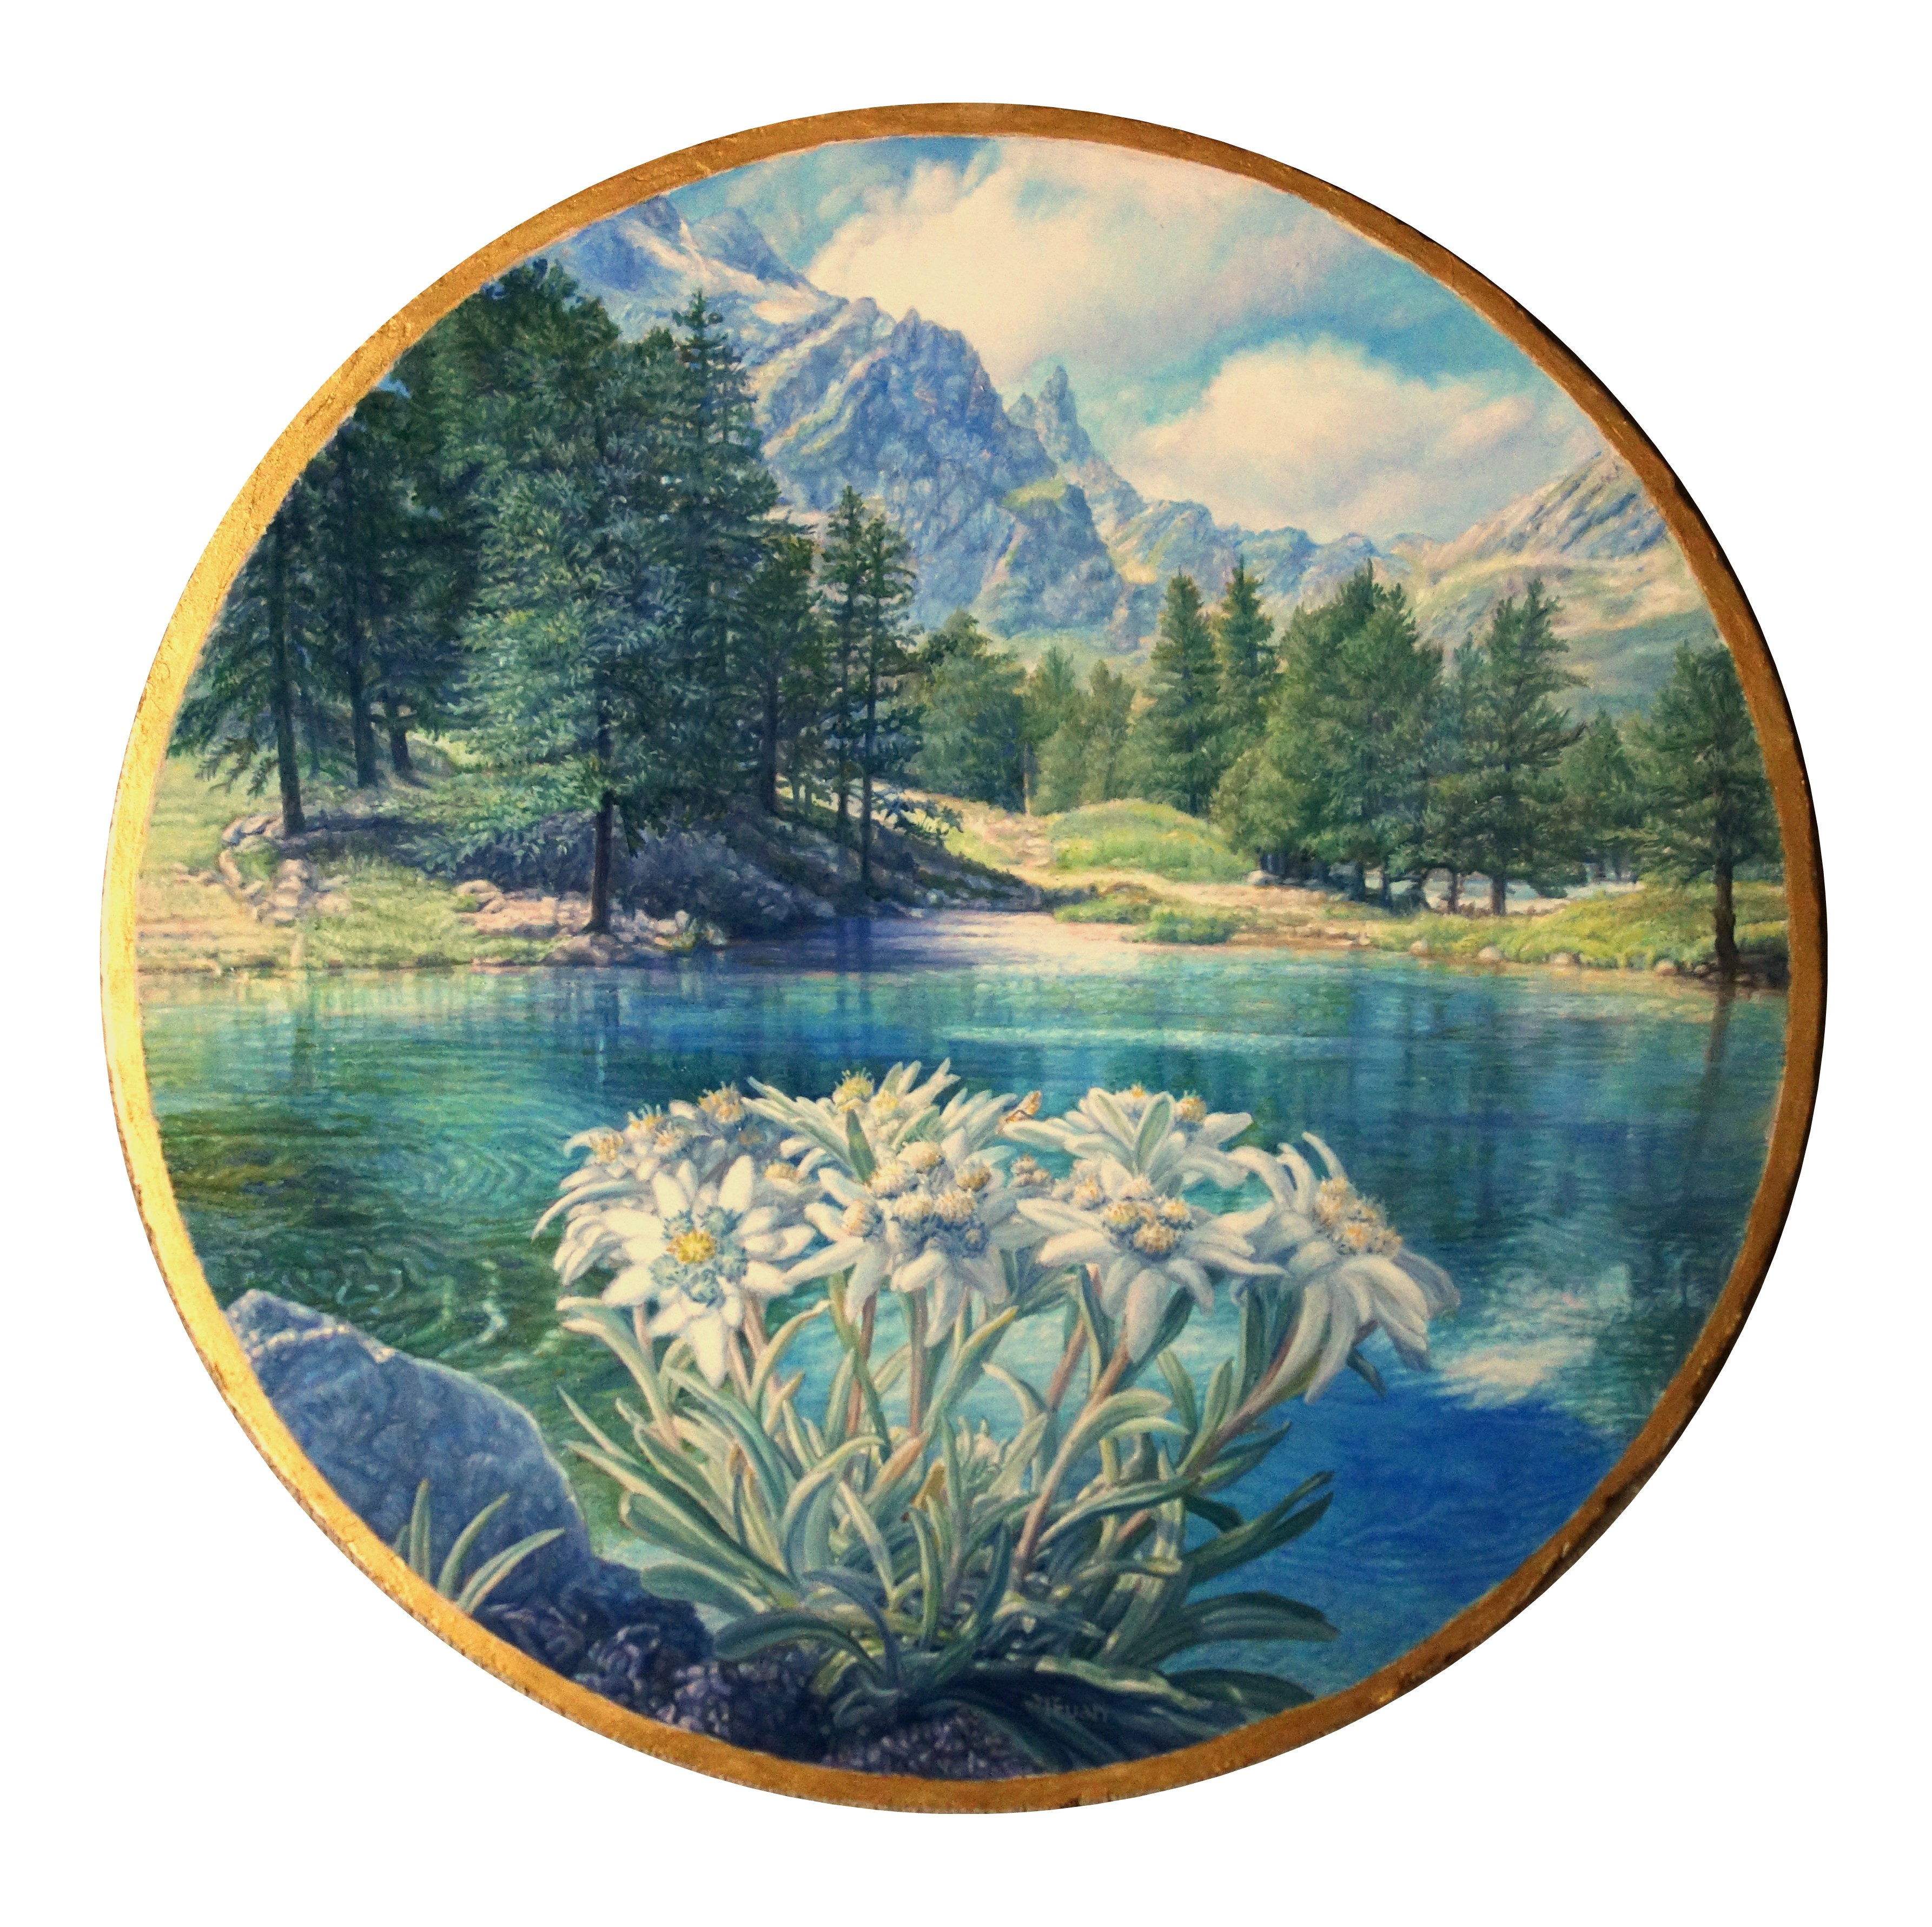 Edelweiss on the Lake, 2022, acrylic and oil on canvas on good, diameter 14.17 in.